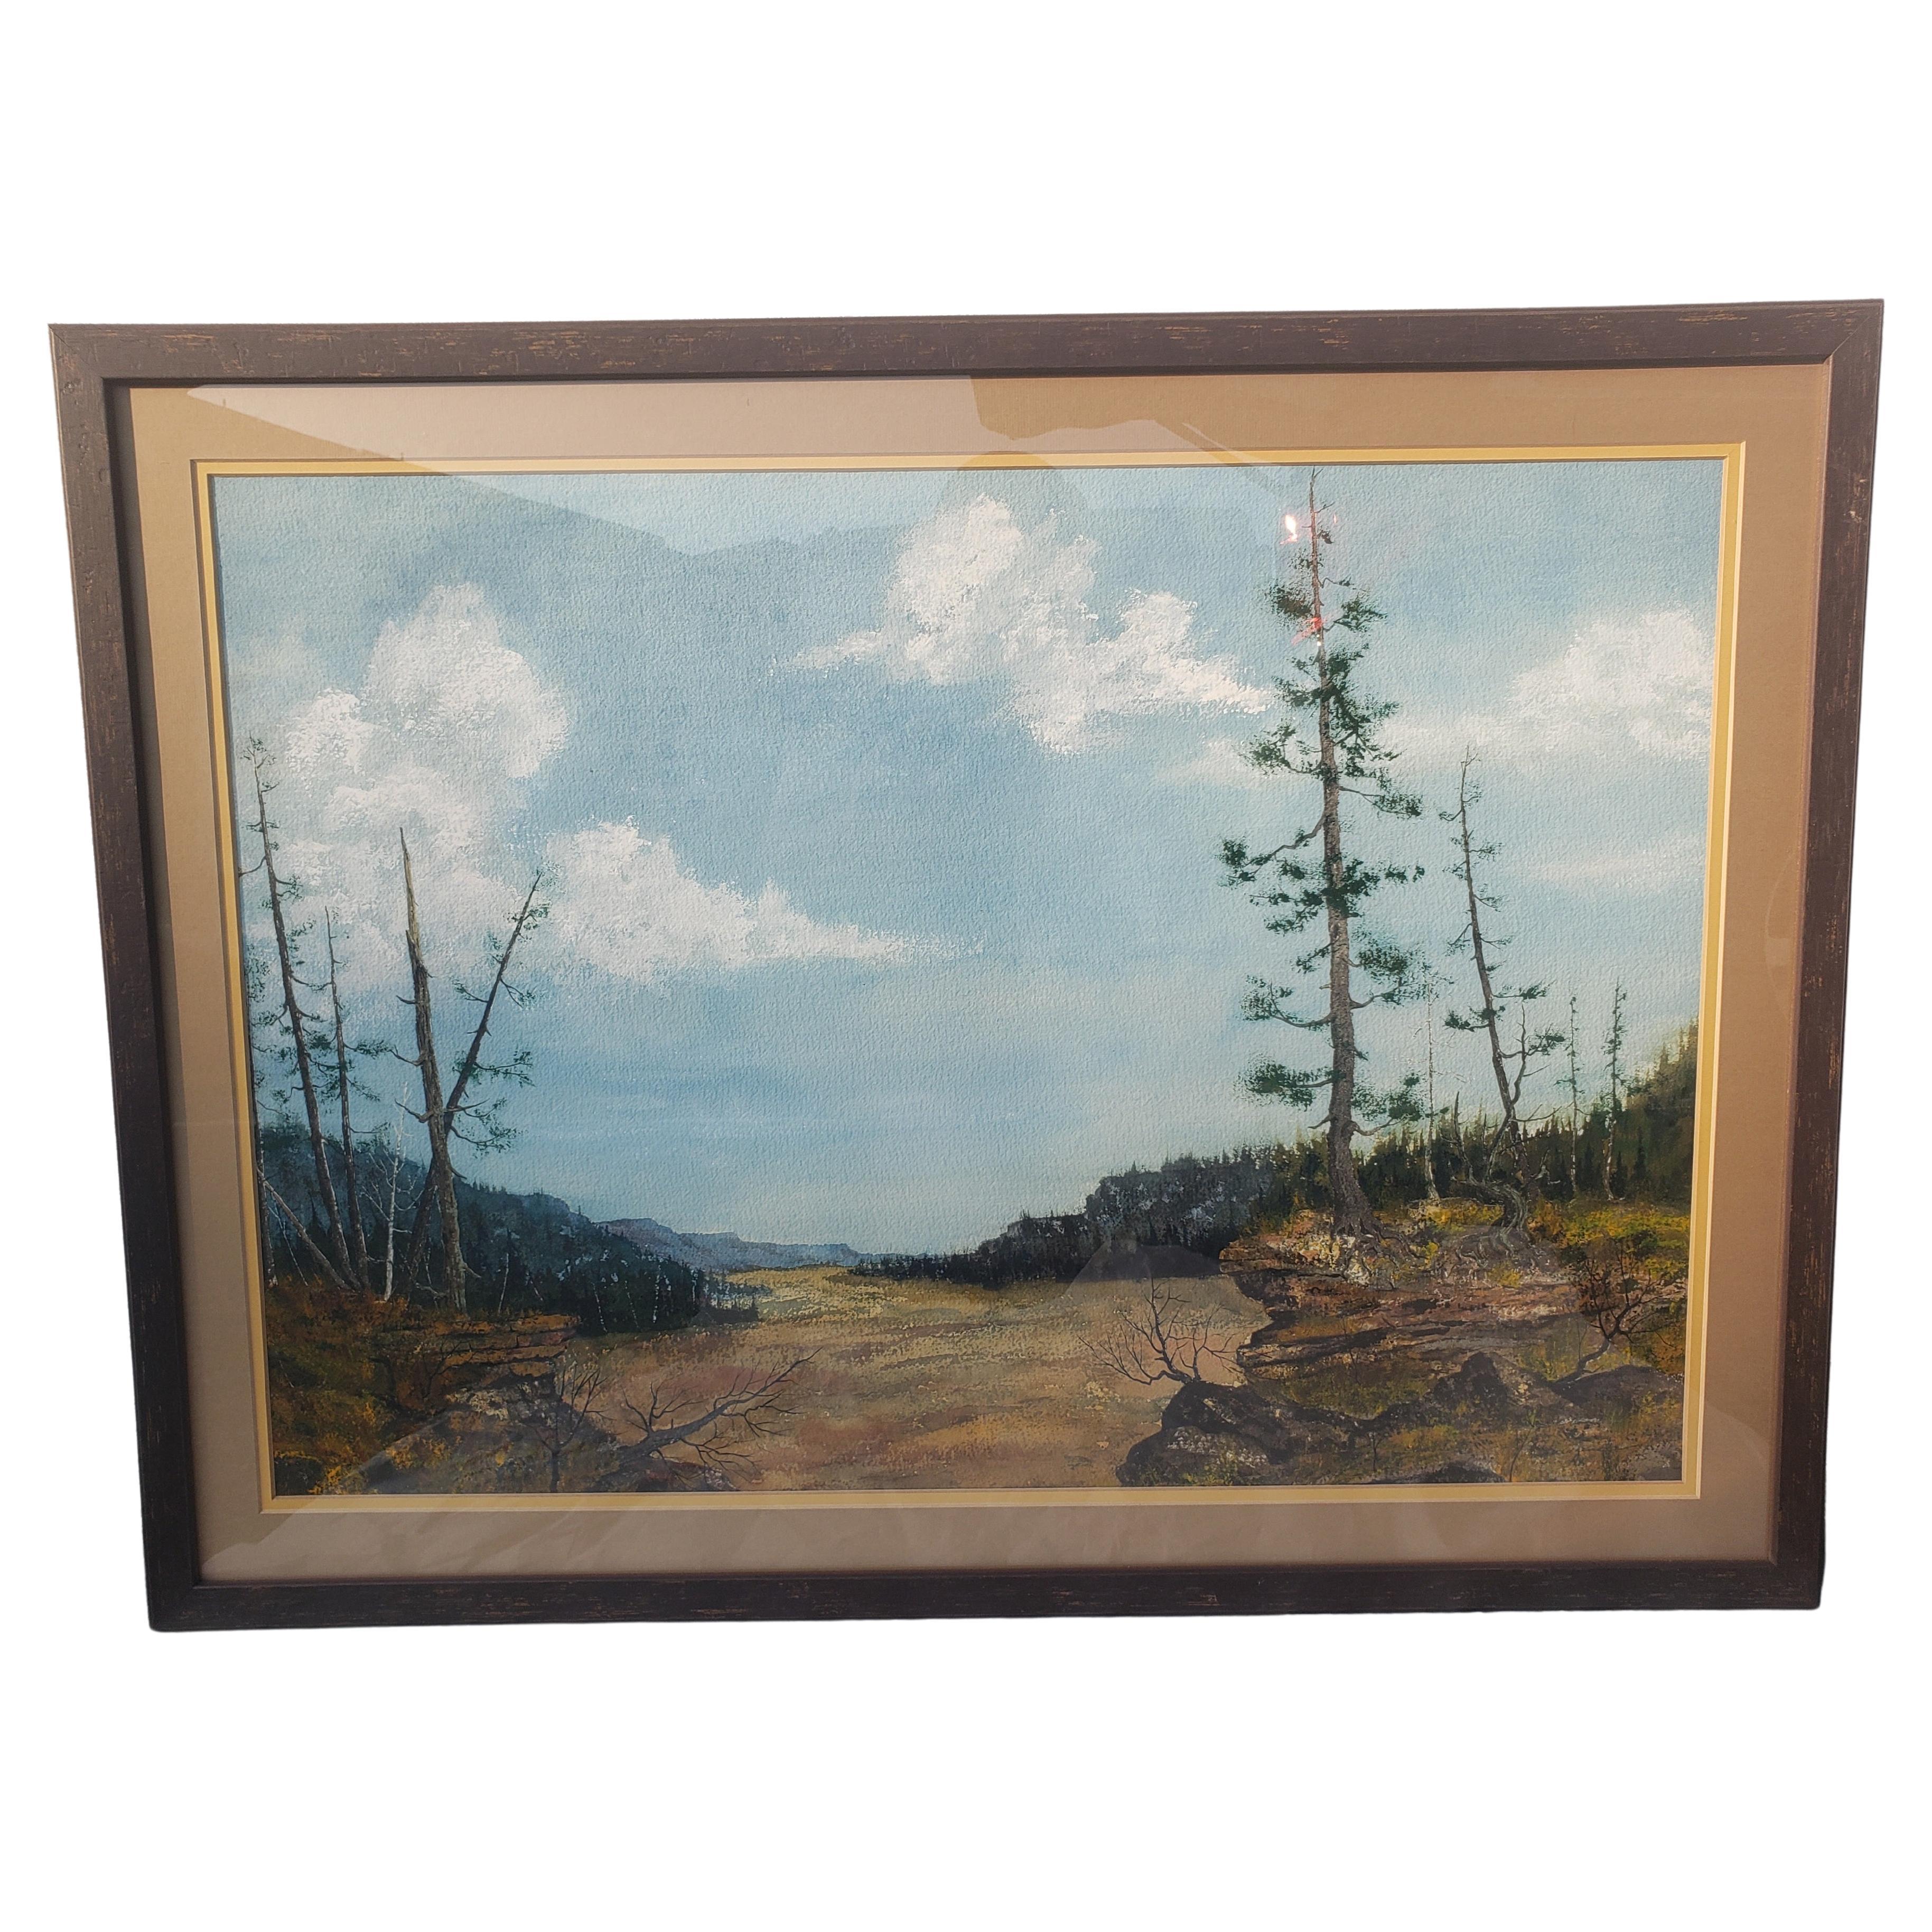 American School, 20th Century, Sparse Landscape, Watercolor And Gouache, Signed Illegibly And Dated '75 L.R.
Measures 32.5